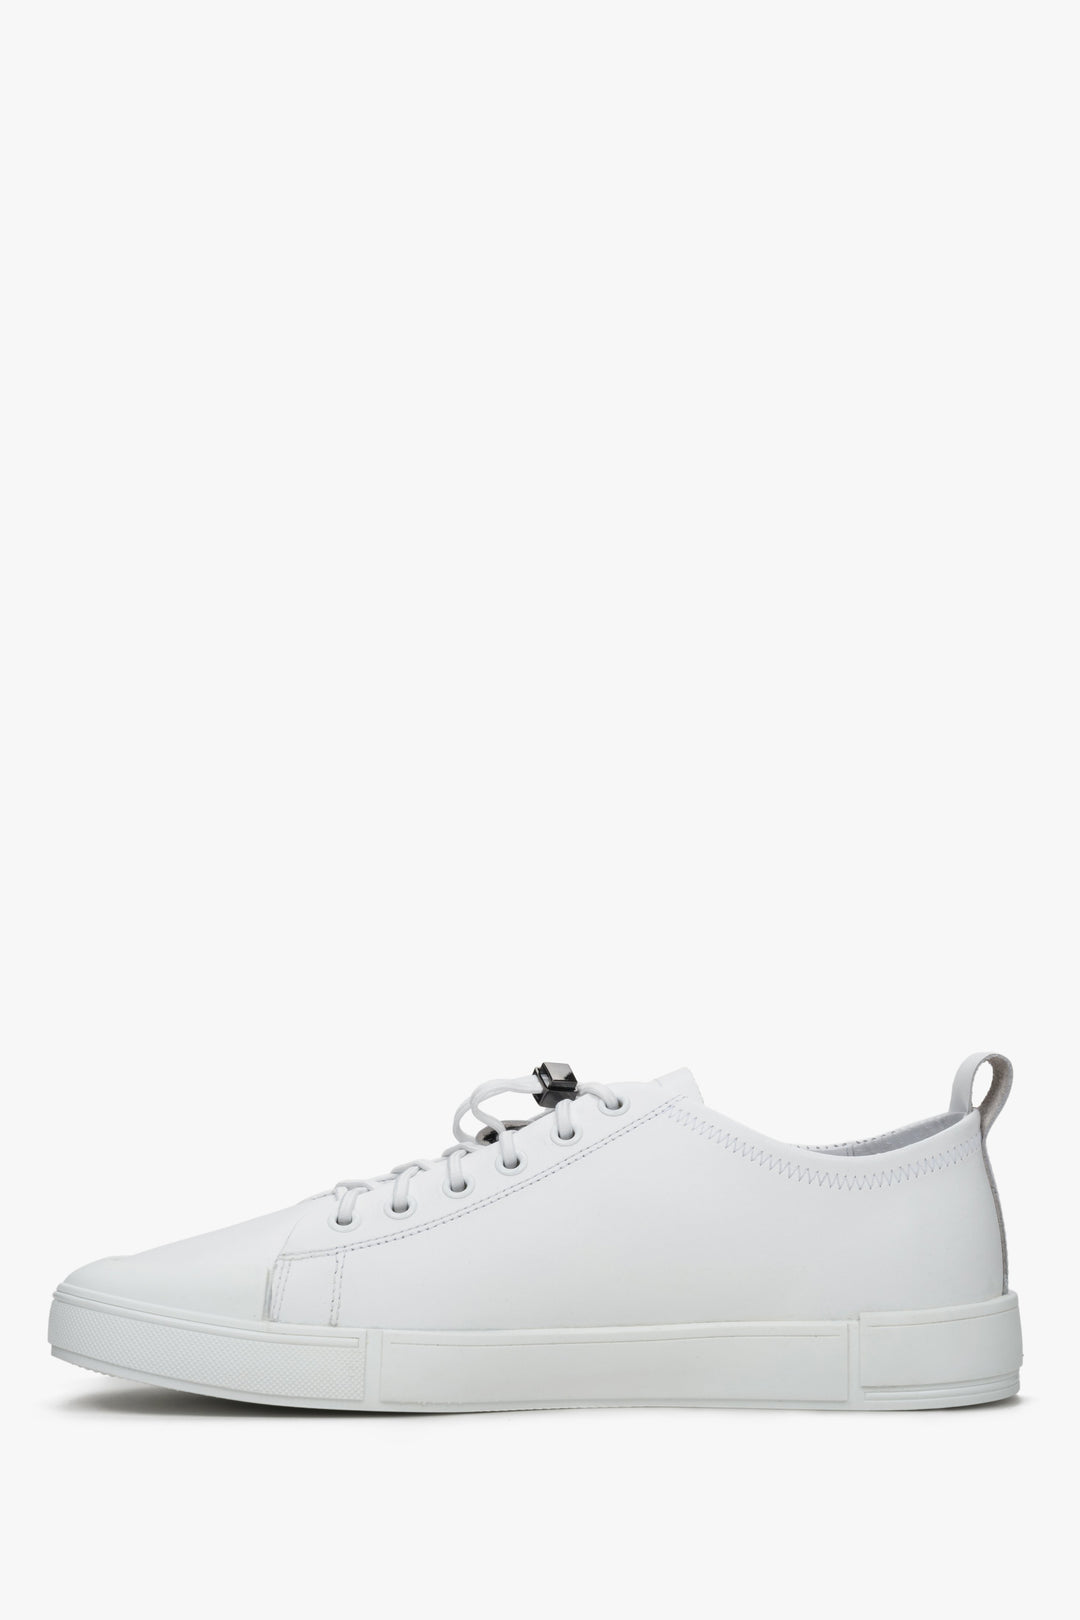 Men's white leather sneakers by Estro - shoe profile for fall.